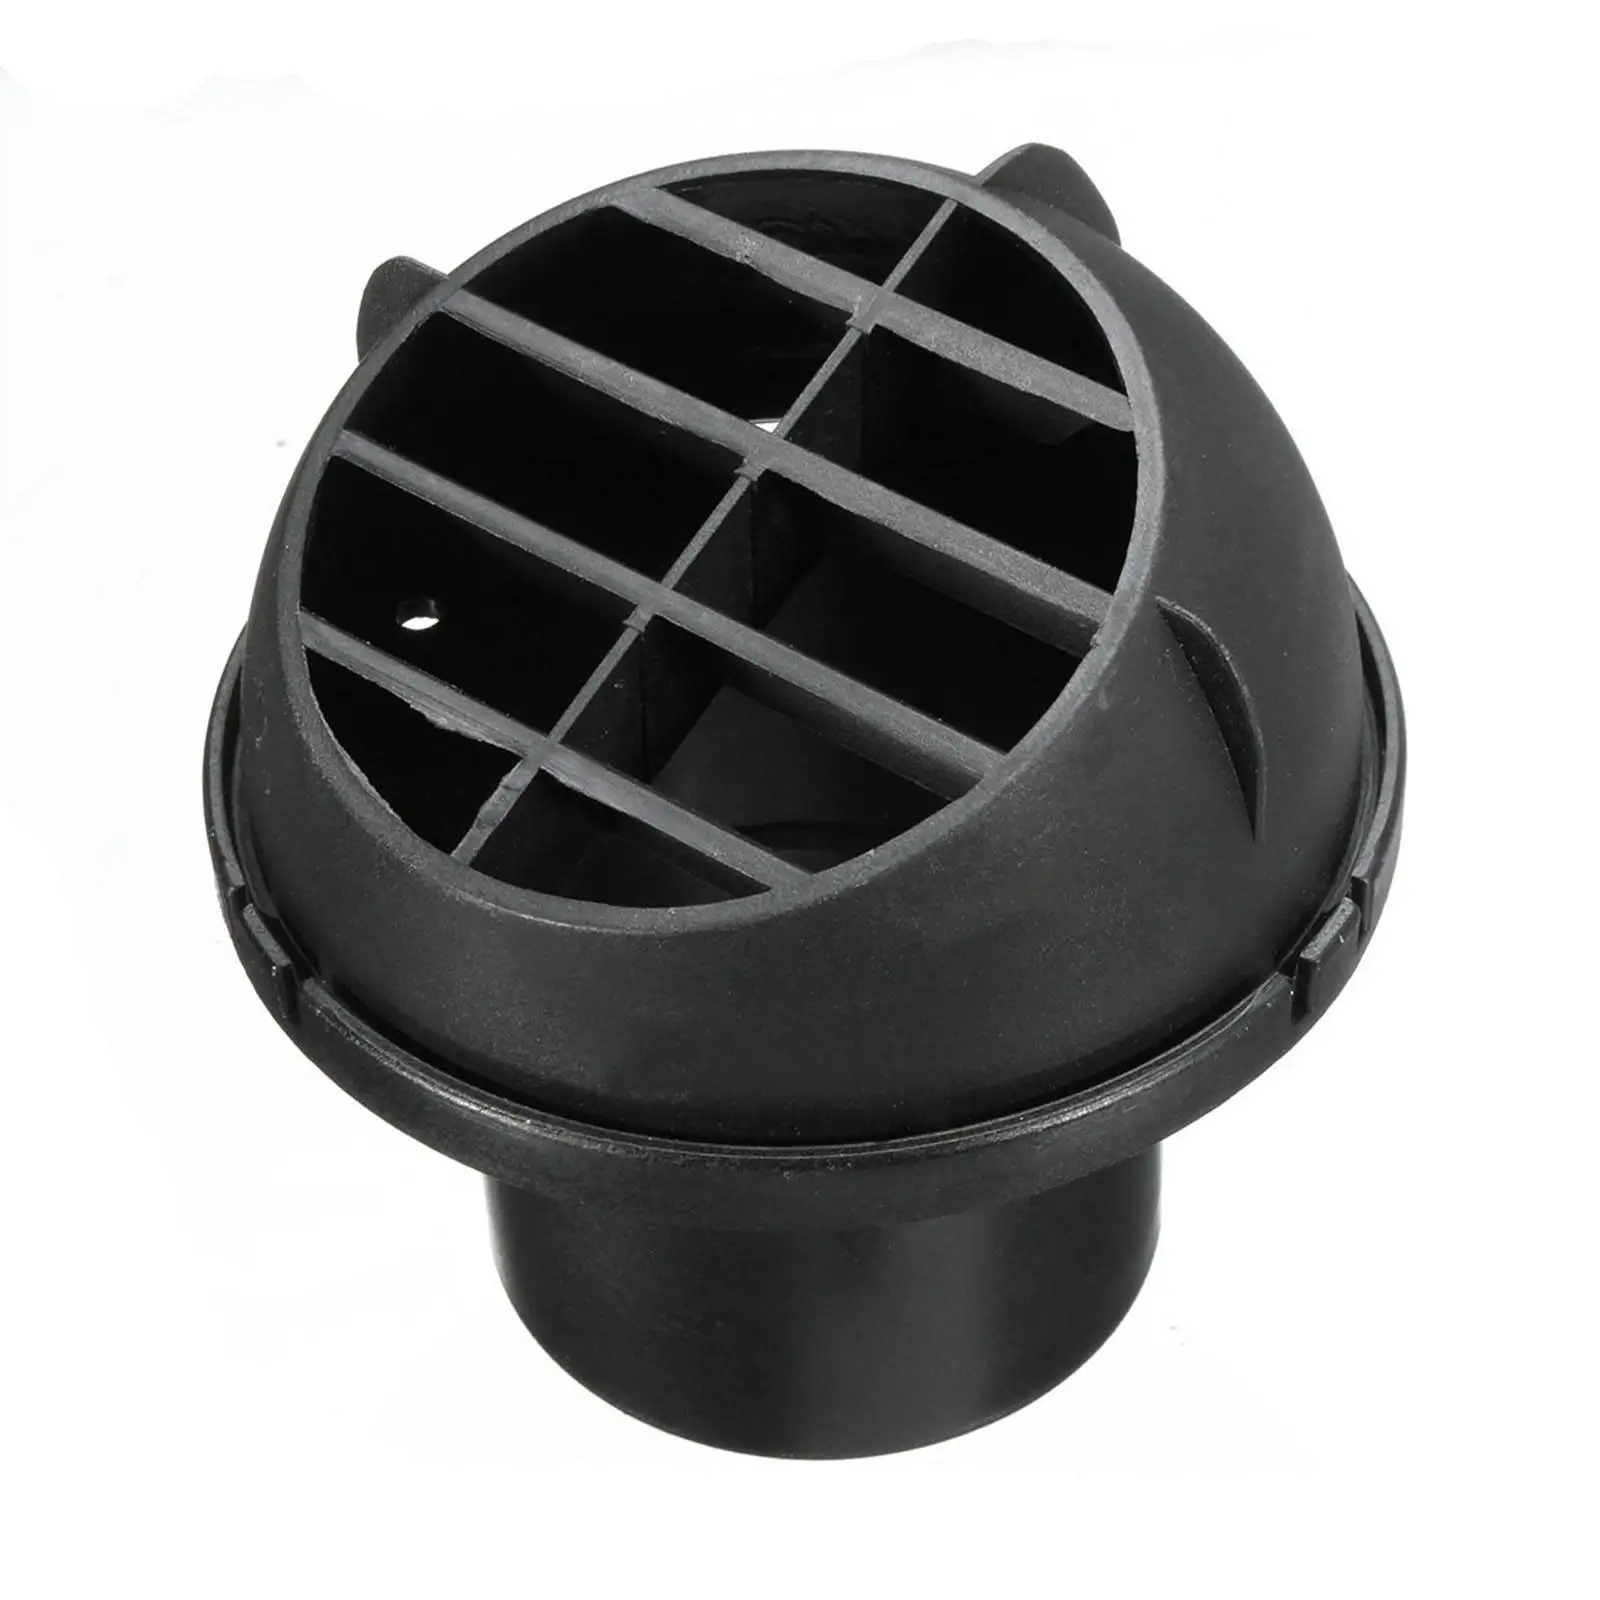 75mm Car Heater Pipe Duct + Car Heater Air Outlet+ Ducting Y Branch + Hose Clip for Parking Heater Replacement